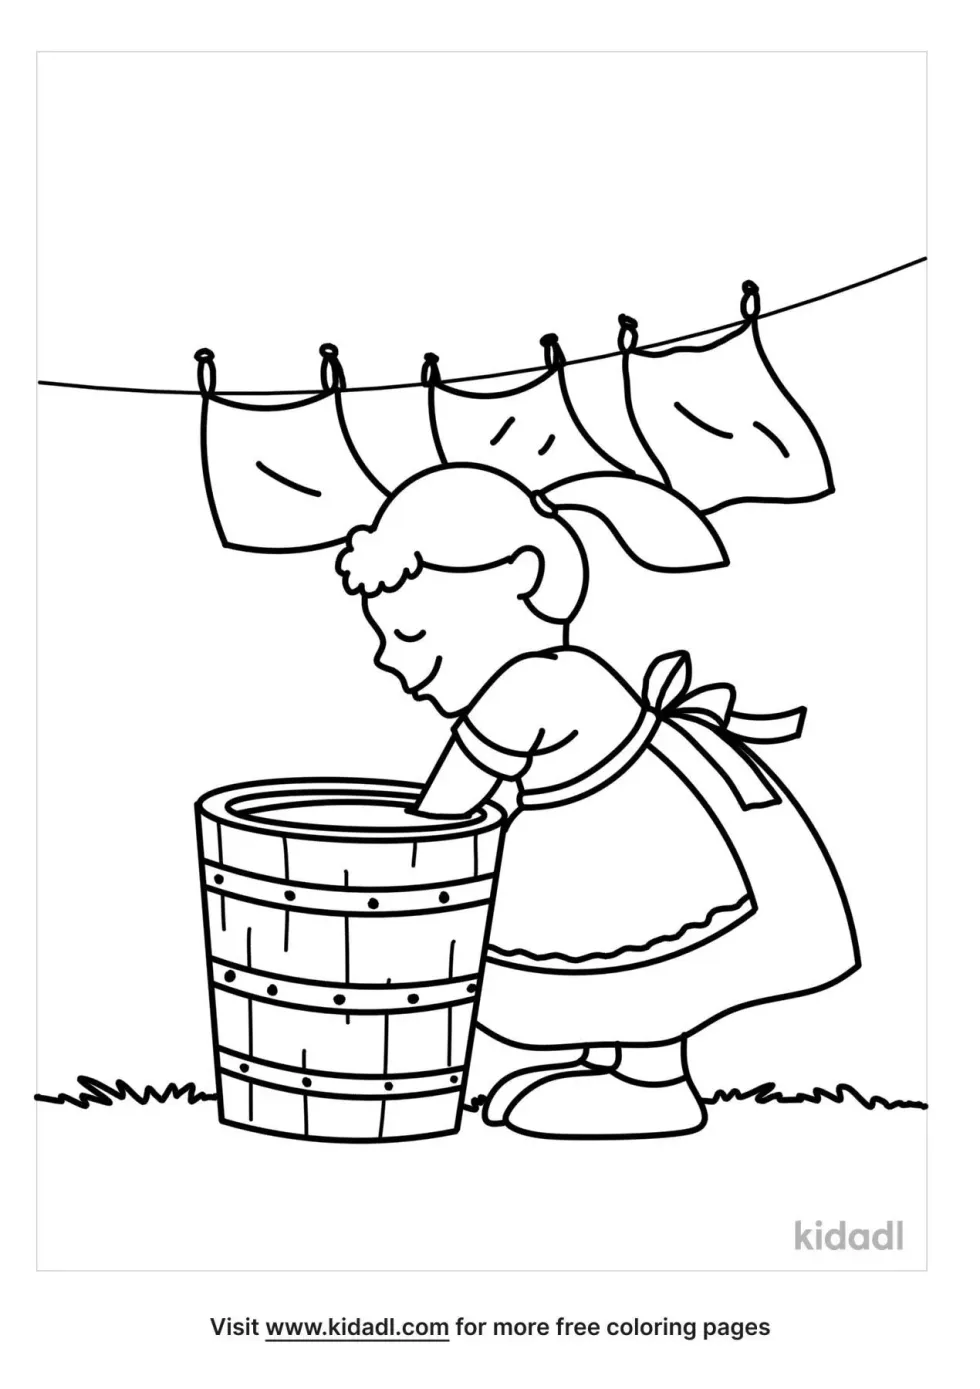 Washing Clothes Coloring Page